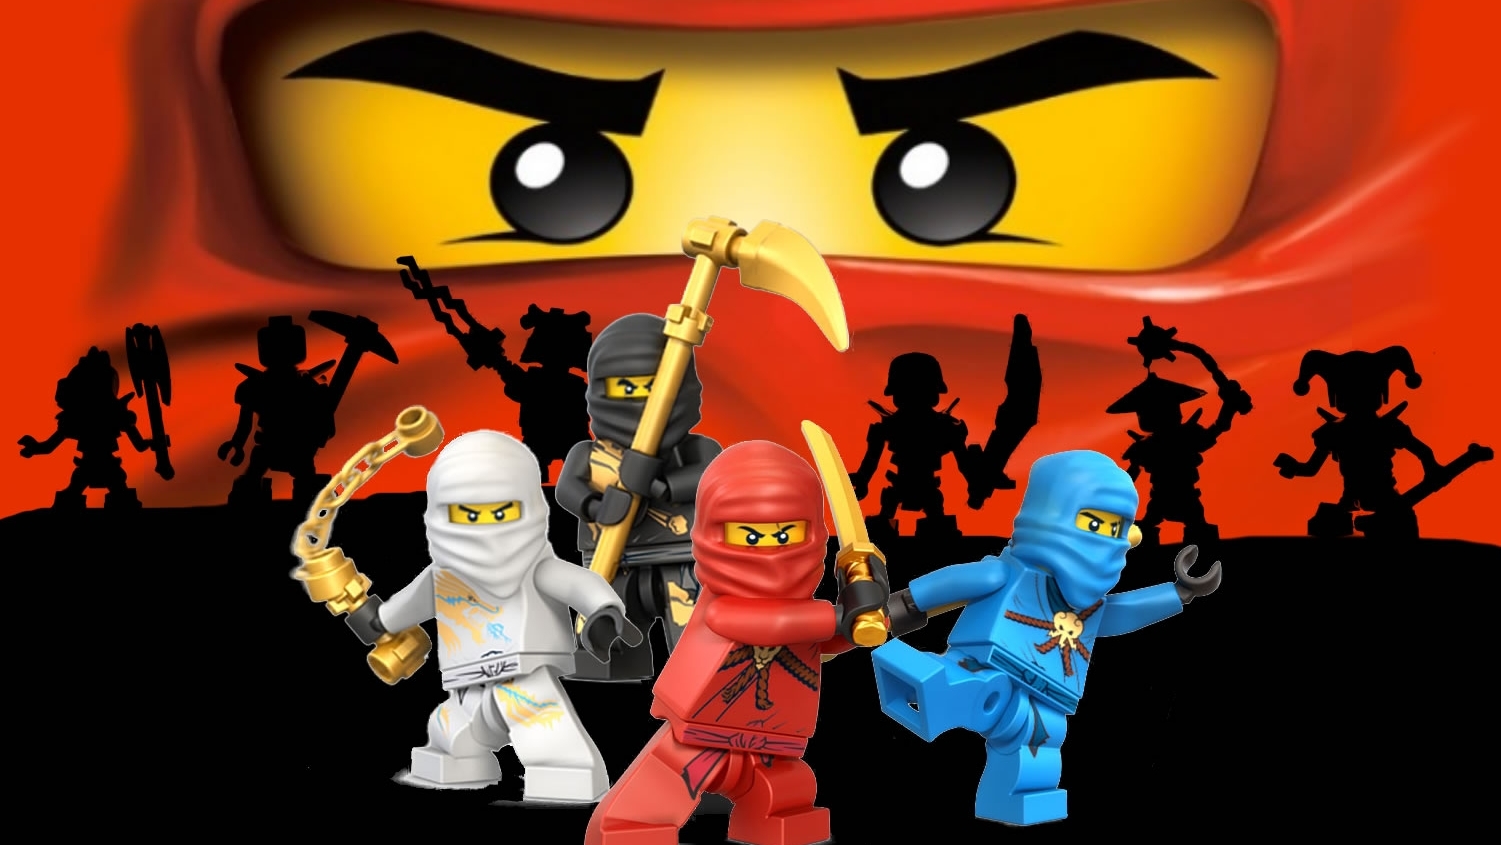 'The Lego movie' spin-off Ninjago verschijnt al in 2016